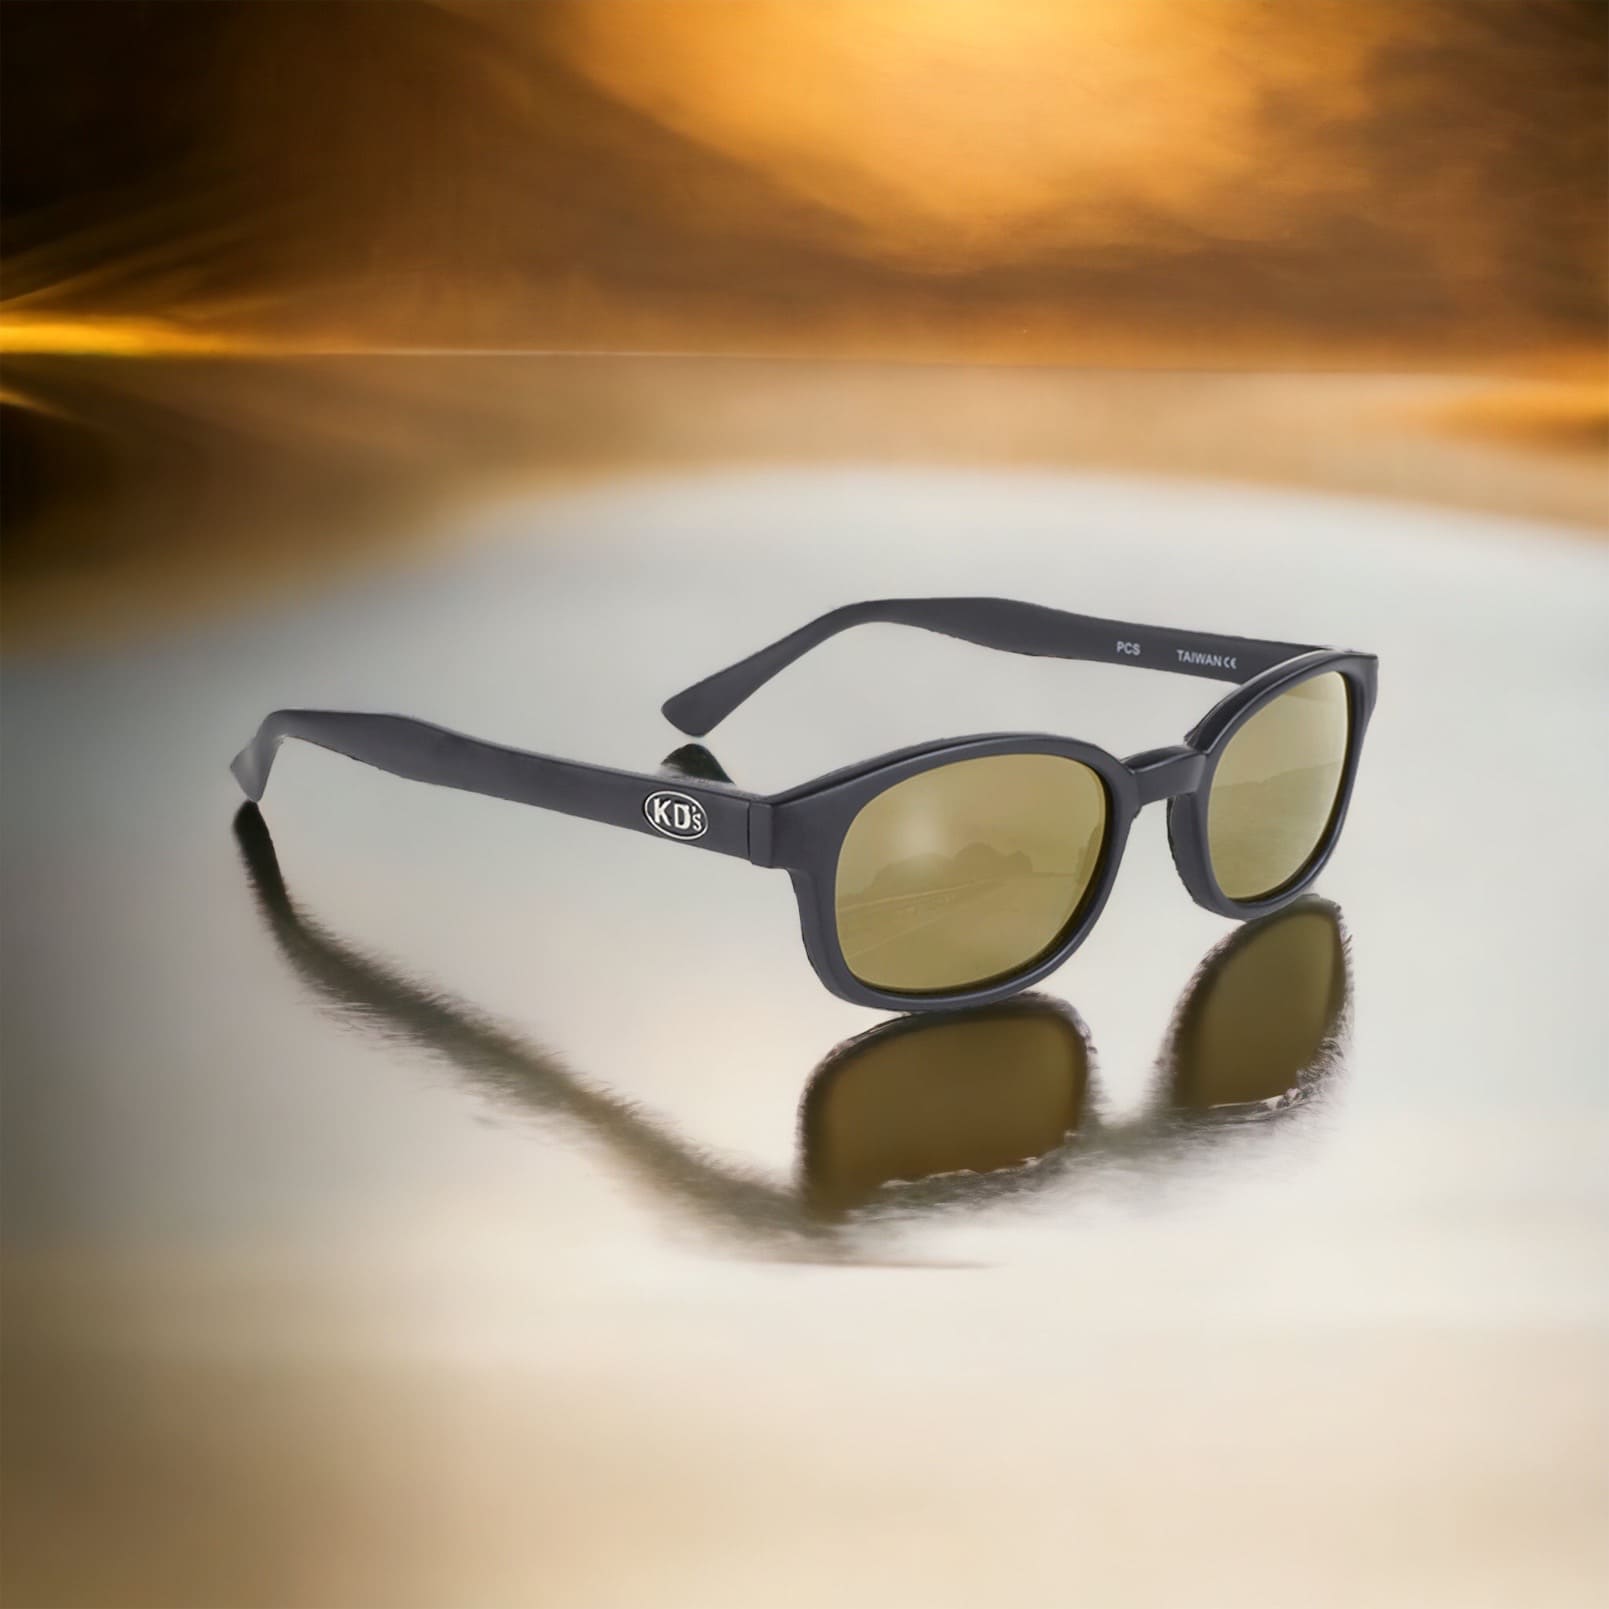 X-KD's 1000 Sunglasses with a matte black frame and golden mirror lenses set on a shiny surface